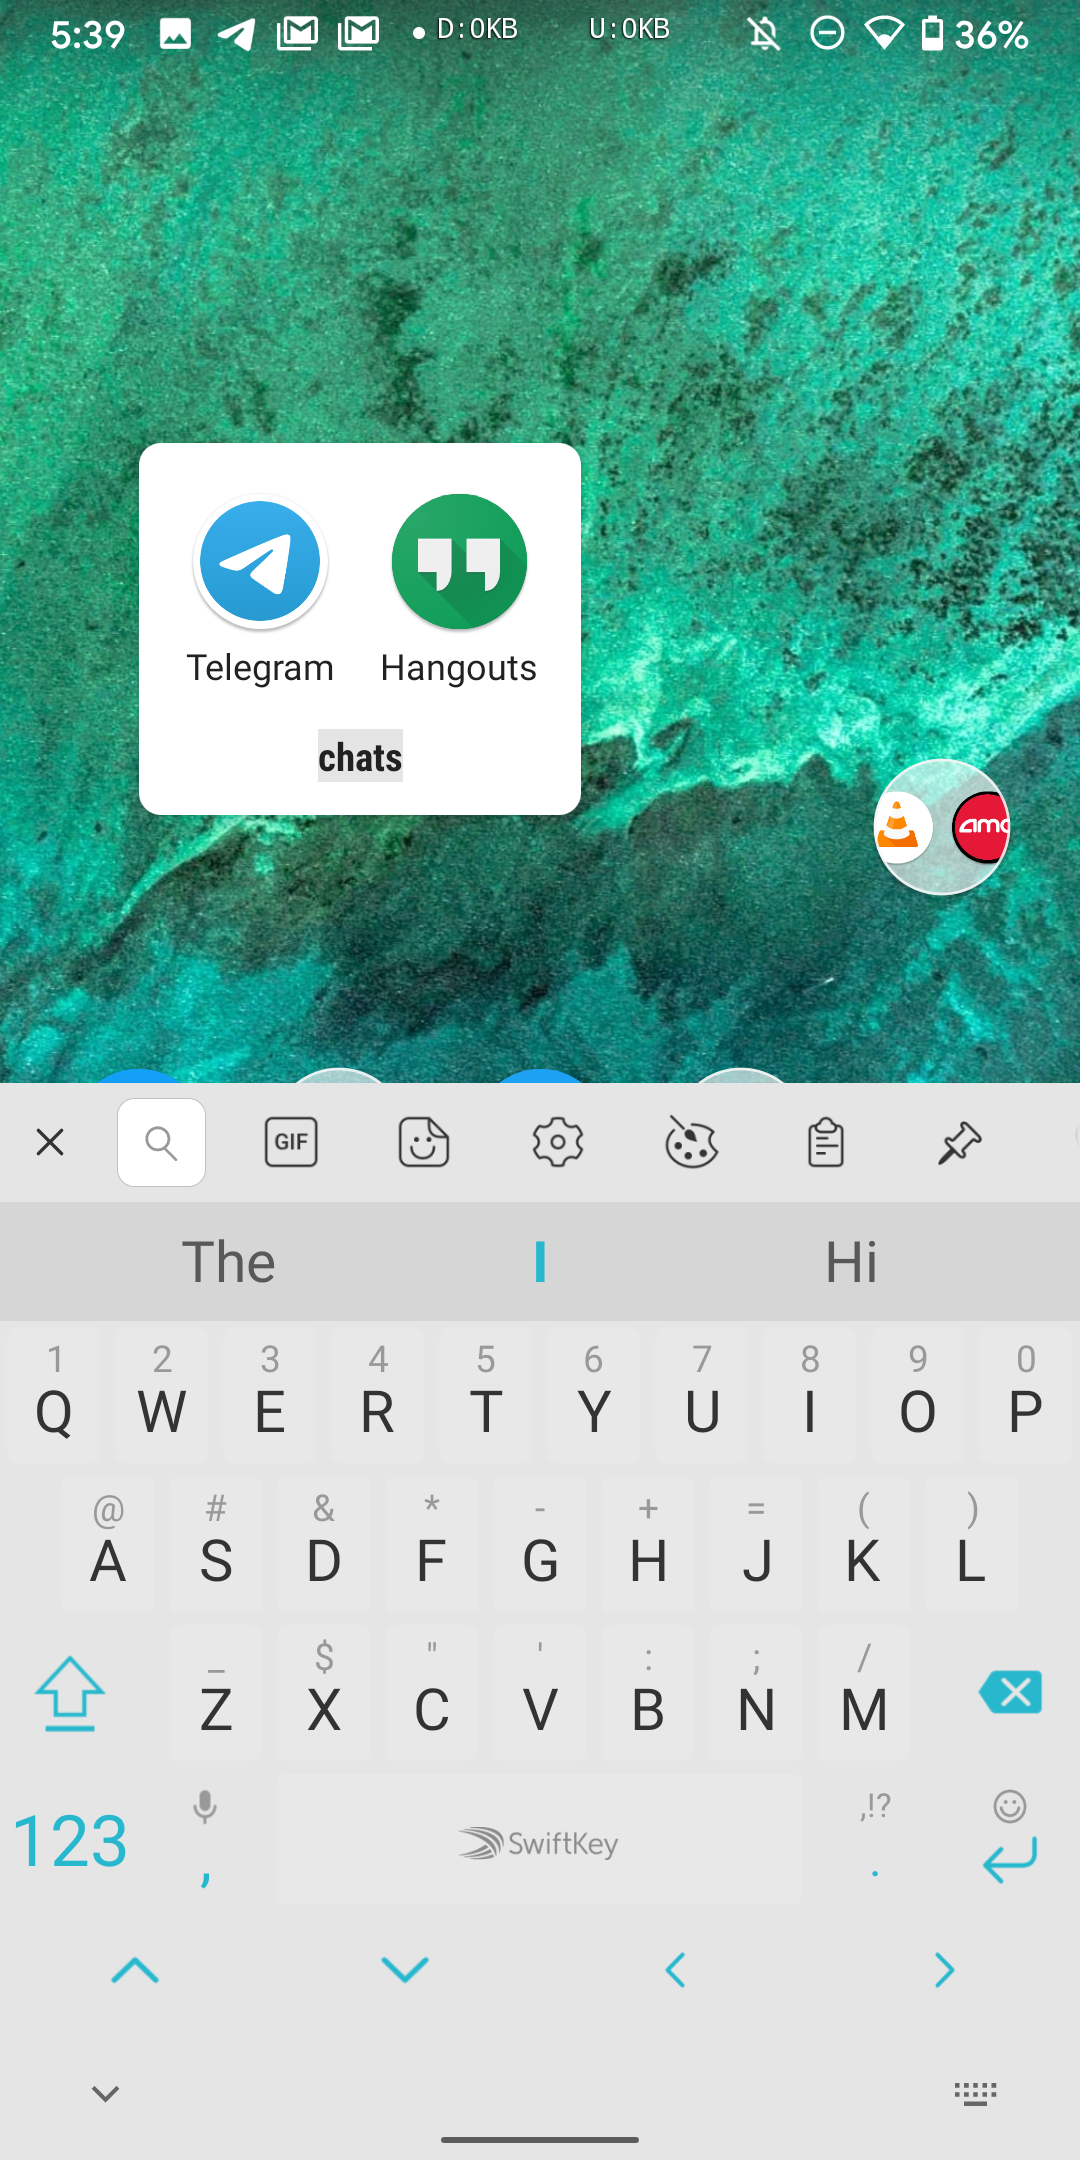 Folder name suggestion recommending chat for Telegram and Hangouts in a folder